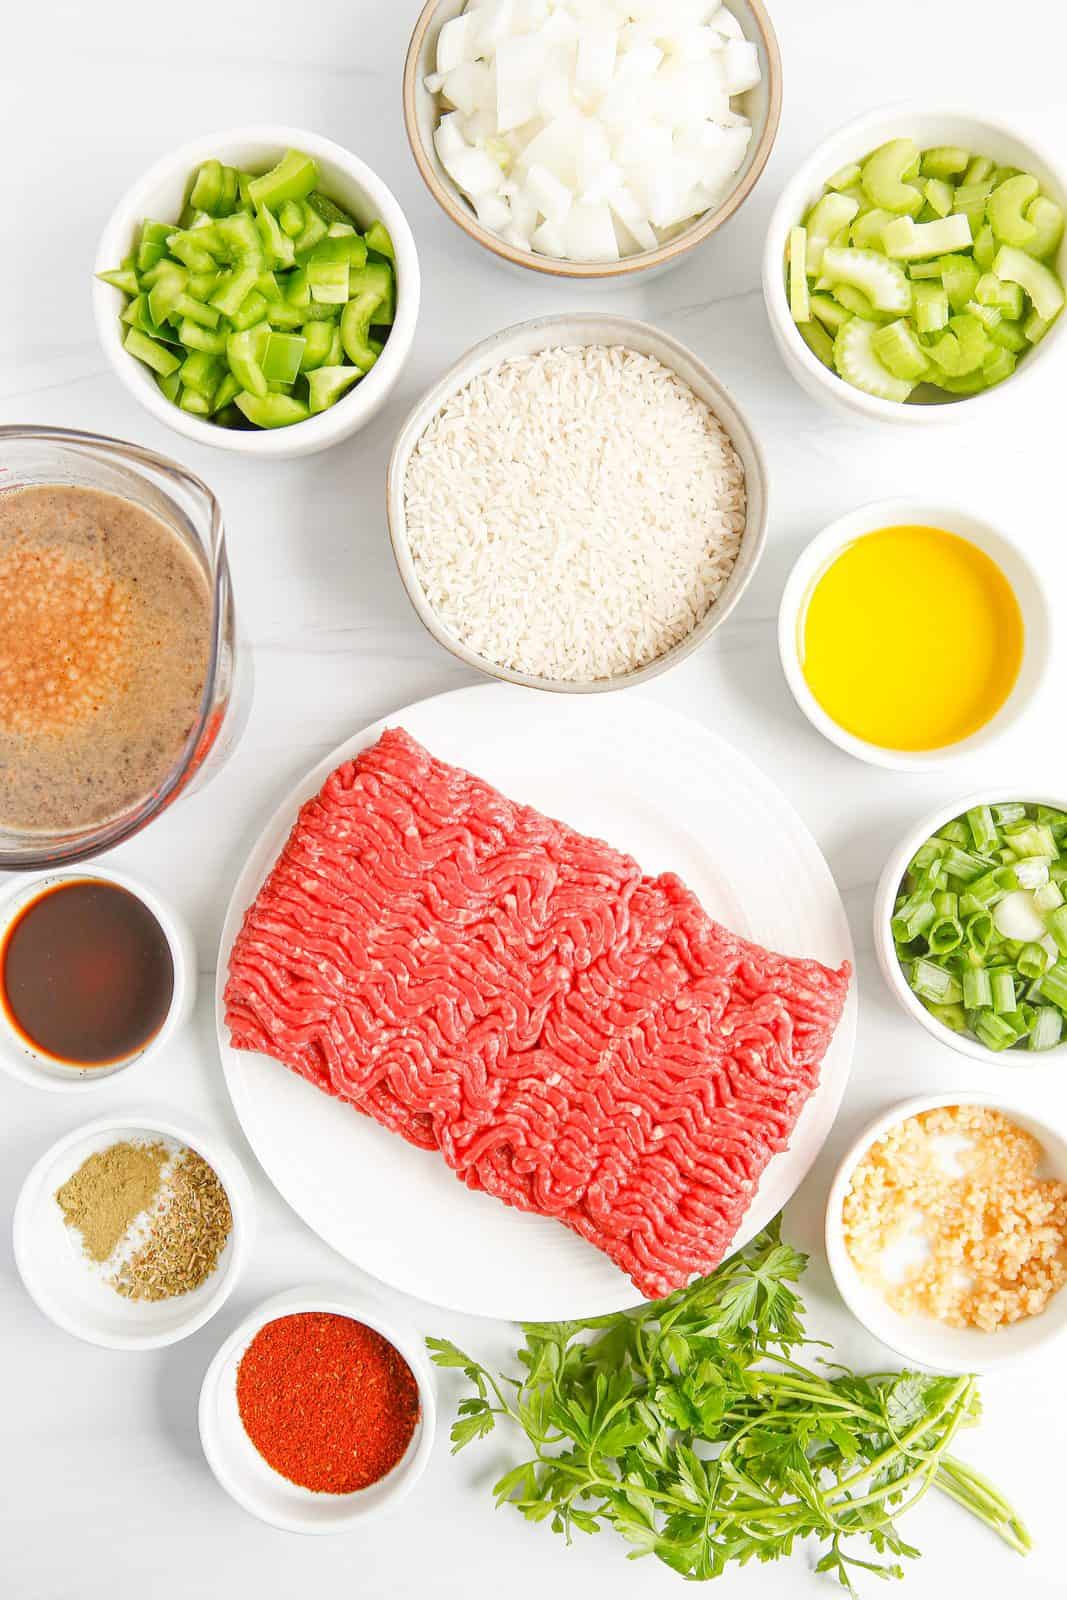 Ingredients needed: ground beef, olive oil, yellow onion, green bell pepper, celery, garlic, thyme, oregano, creole seasoning, worcestershire sauce, salt, pepper, long grain white rice, beef broth, bay leaf, green onions and parsley.